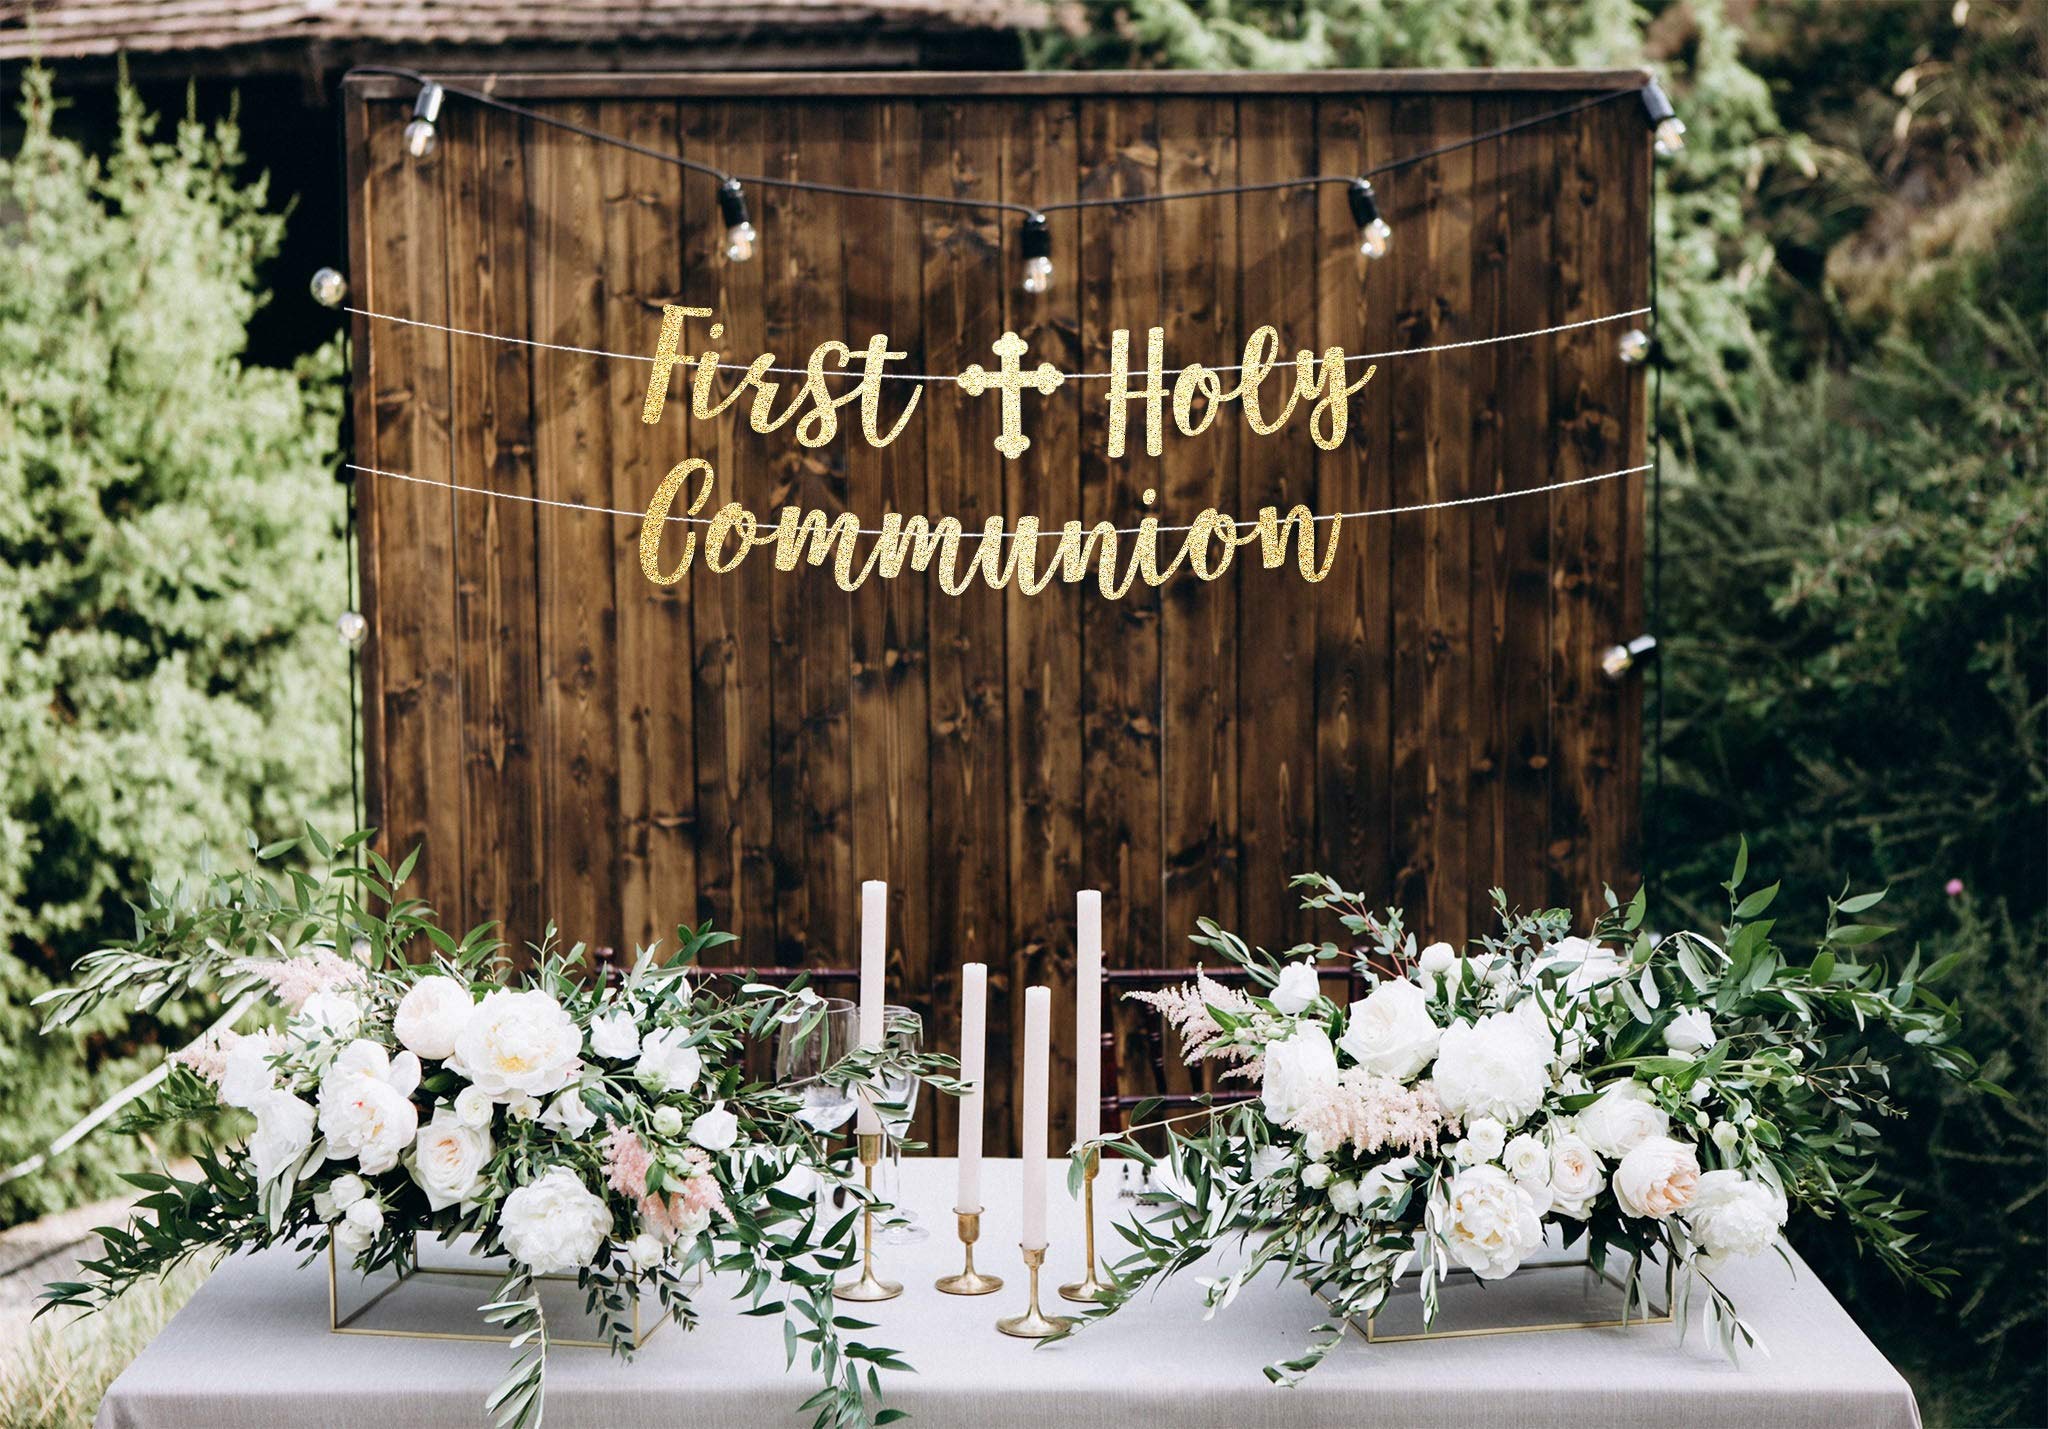 How to Celebrate Her First Holy Communion 2022